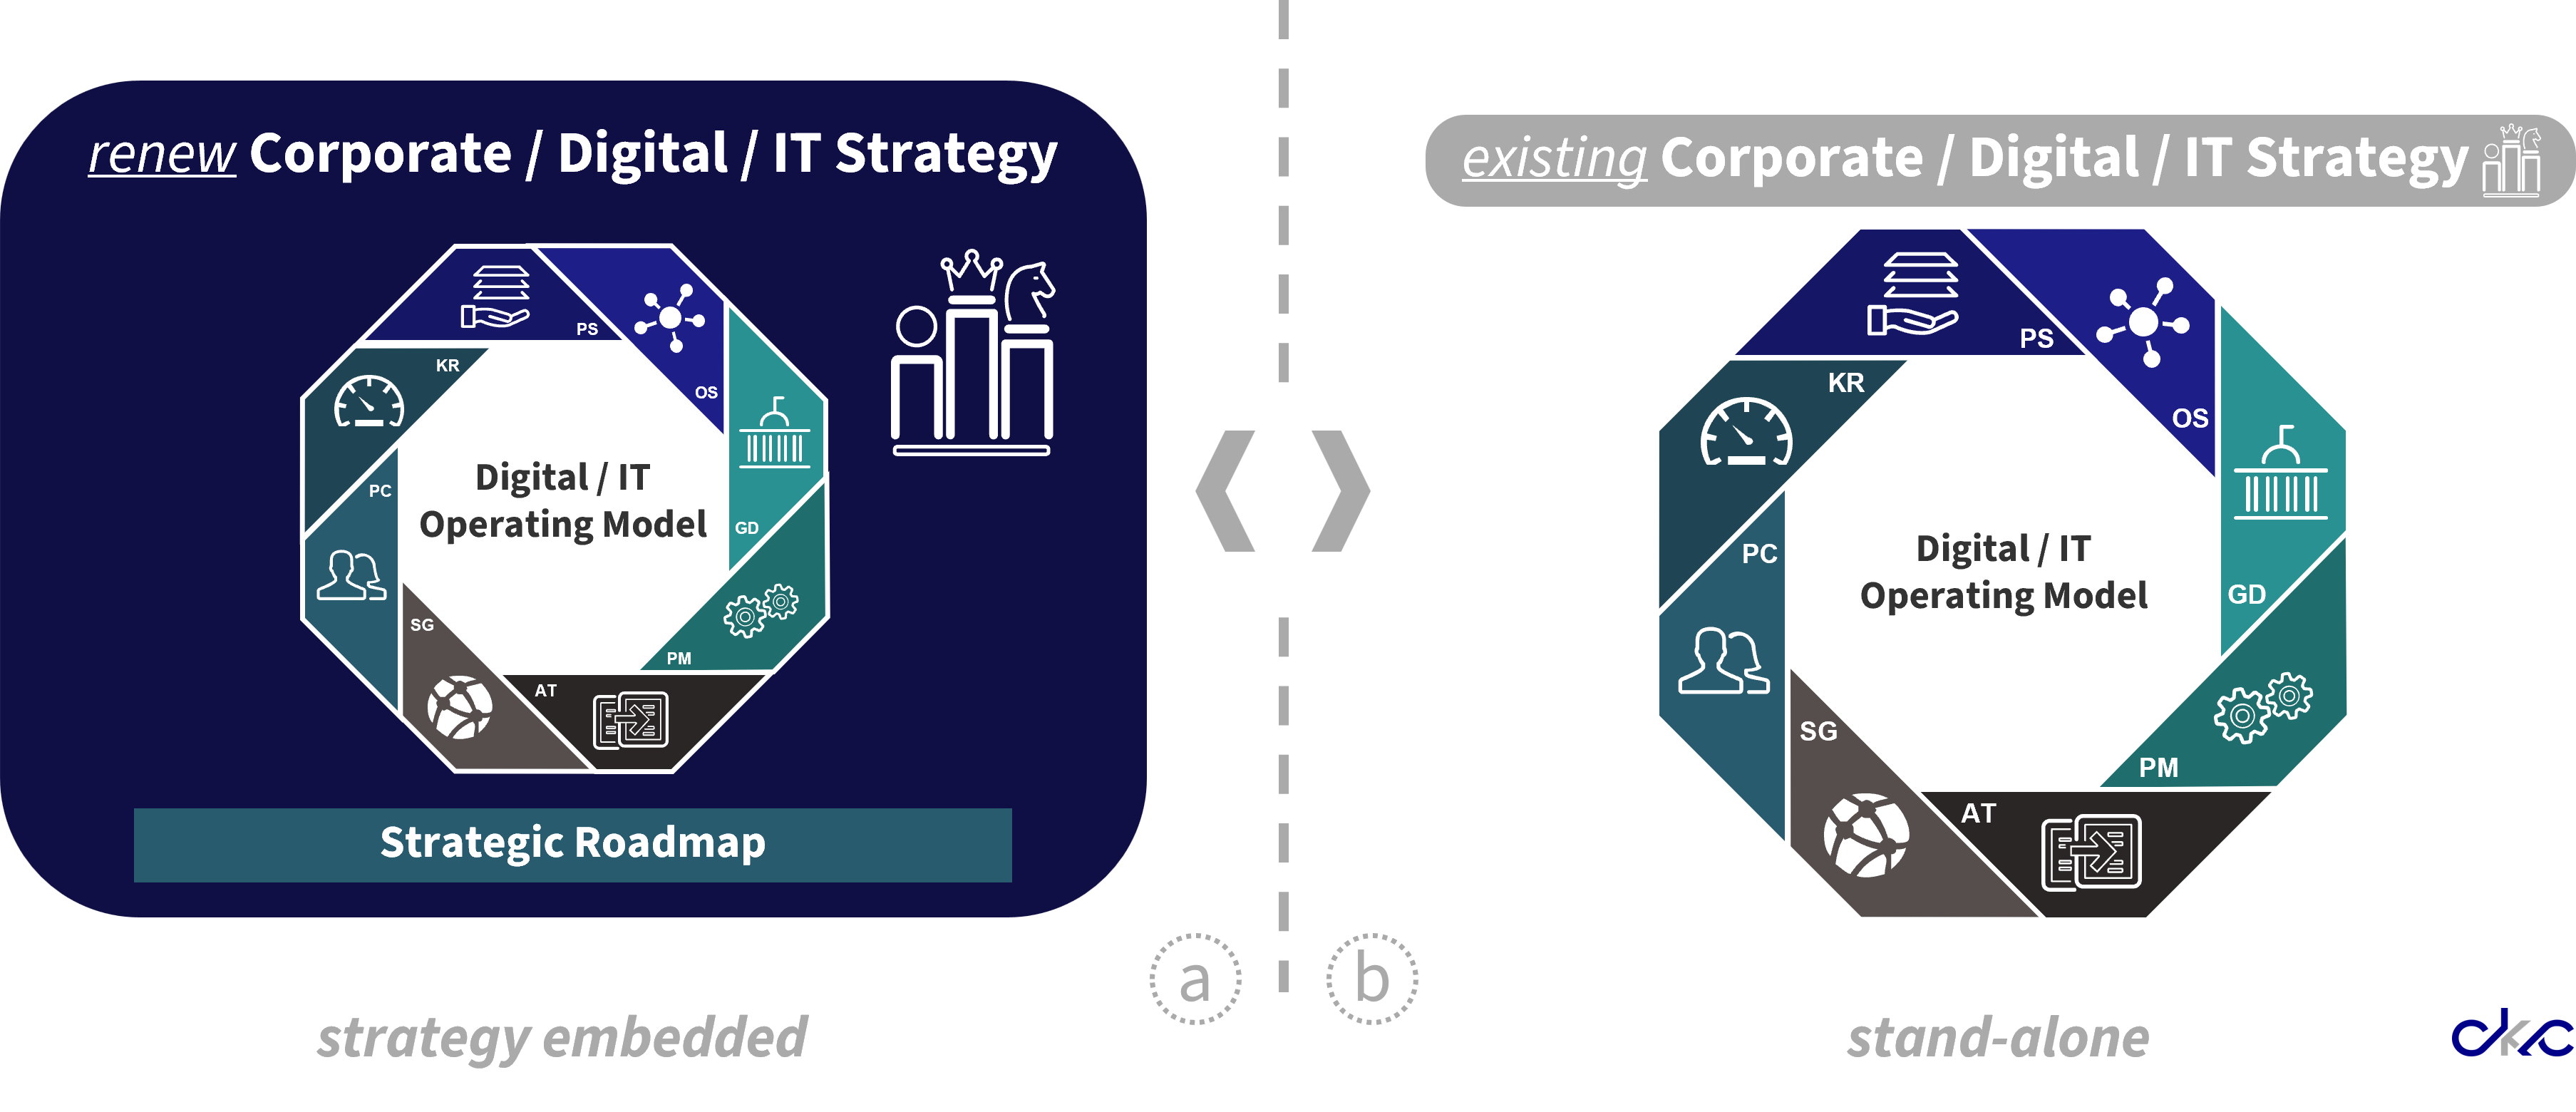 The CKC Digital IT Operating Model Framework can be stand-alone or embedded in the overall strategy process.